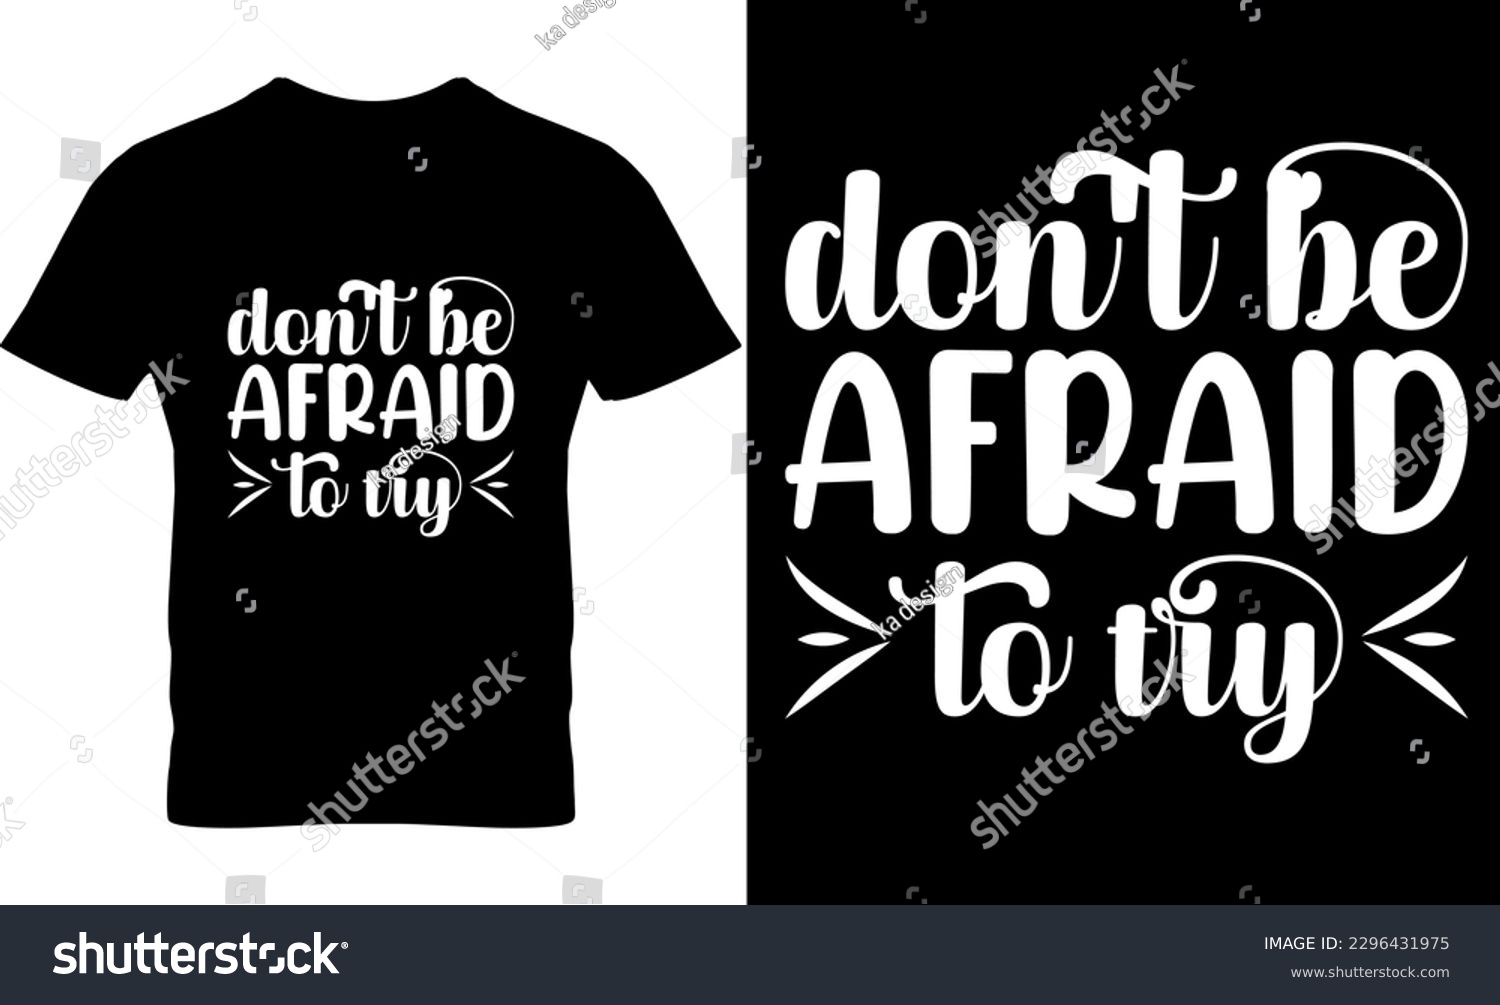 SVG of don't be afraid to try, Graphic, illustration, vector, typography, motivational, inspiration, inspiration t-shirt design, Typography t-shirt design, motivational quotes, motivational t-shirt design, svg